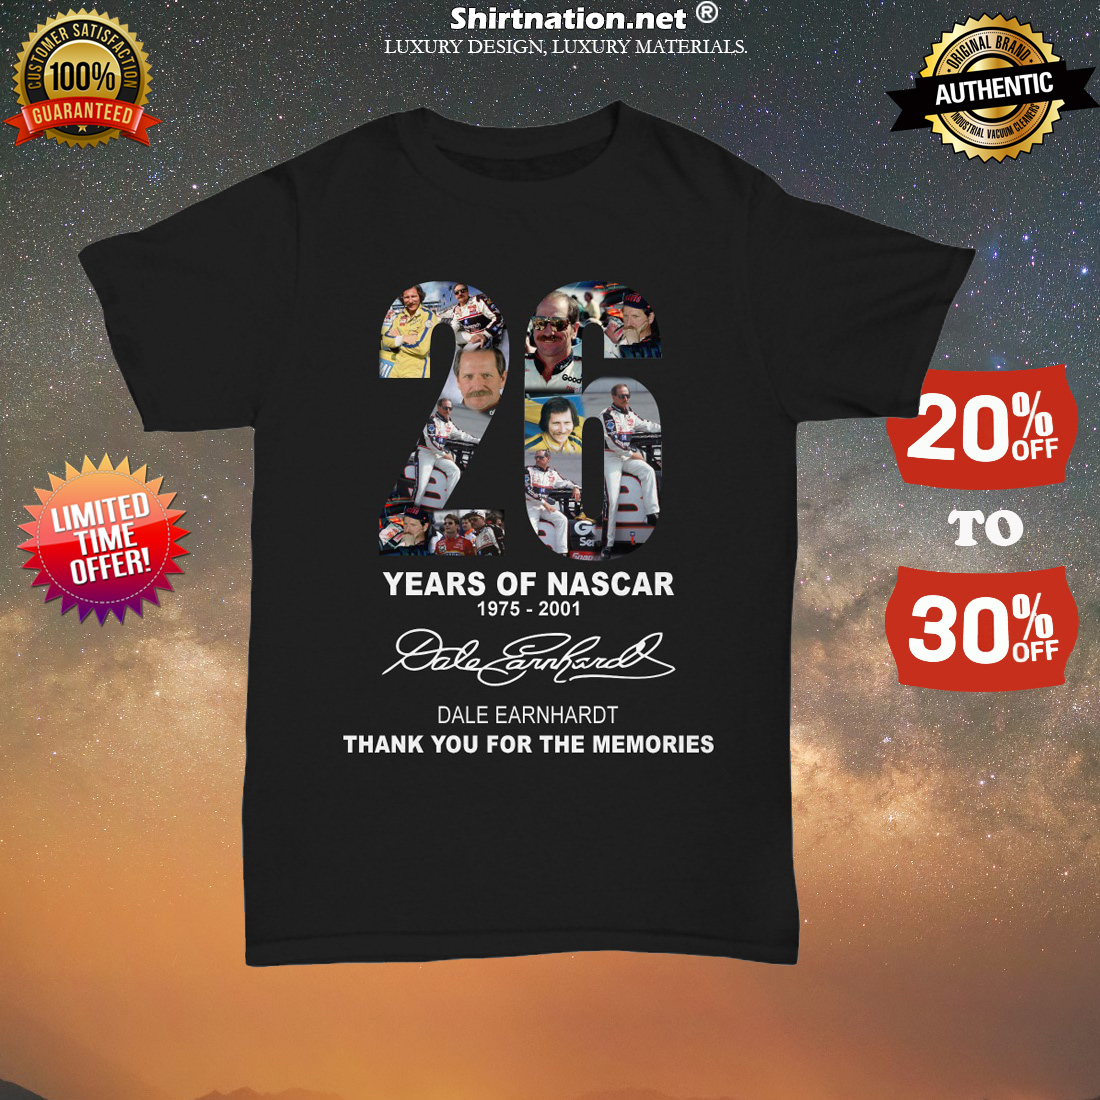 26 years of Nascar Dale Earnhardt thank you for the memories unisex tee shirt